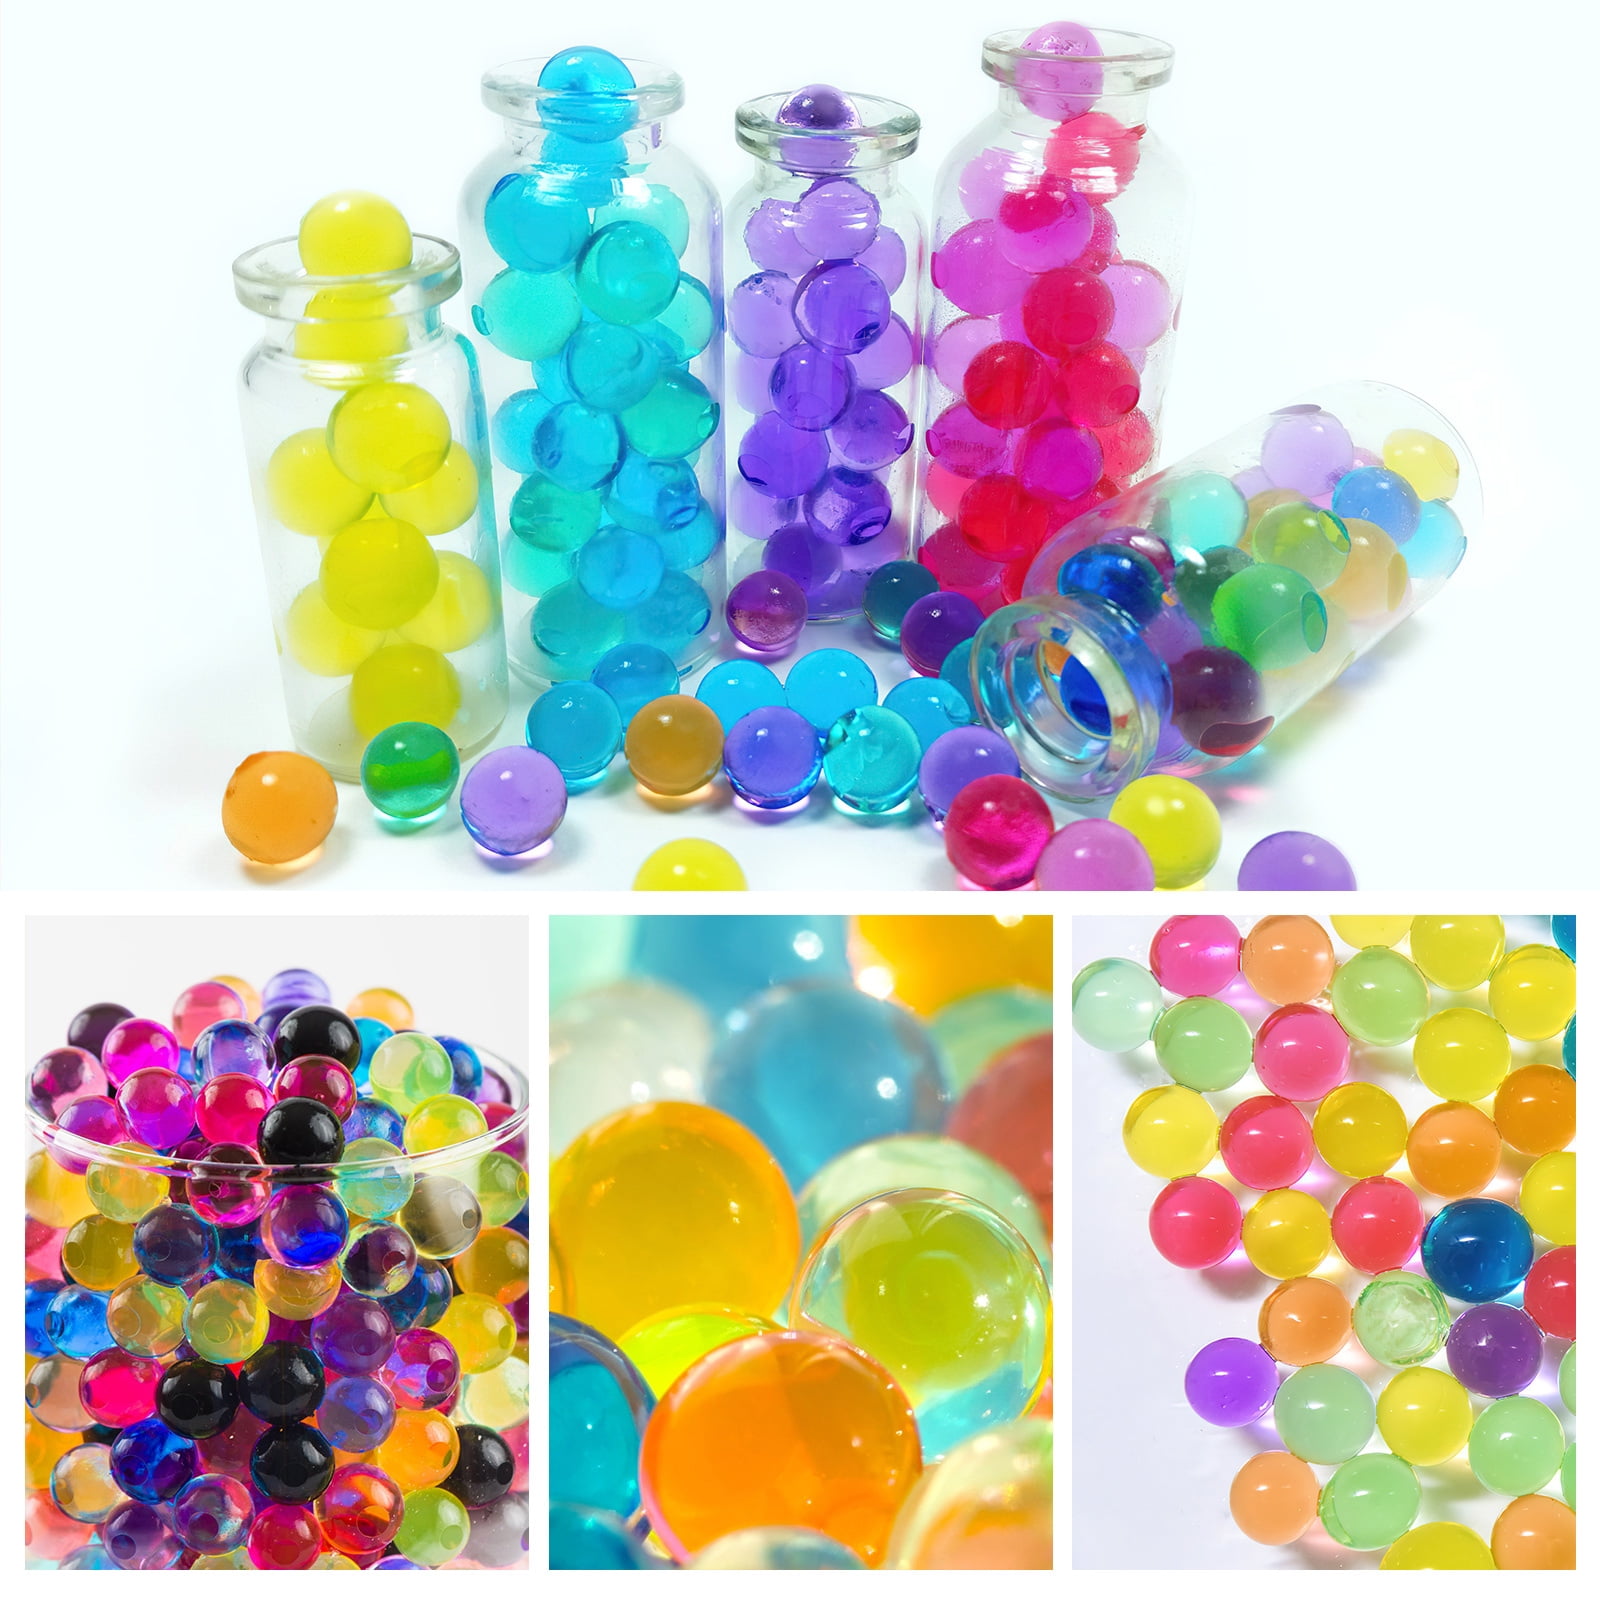 BYMORE 70000 Clear Water Beads,Transpatent Gel Jelly Beads,Vase Filler for  Candle, Wedding Centerpiece, Floral Arrangement, Home Decorations